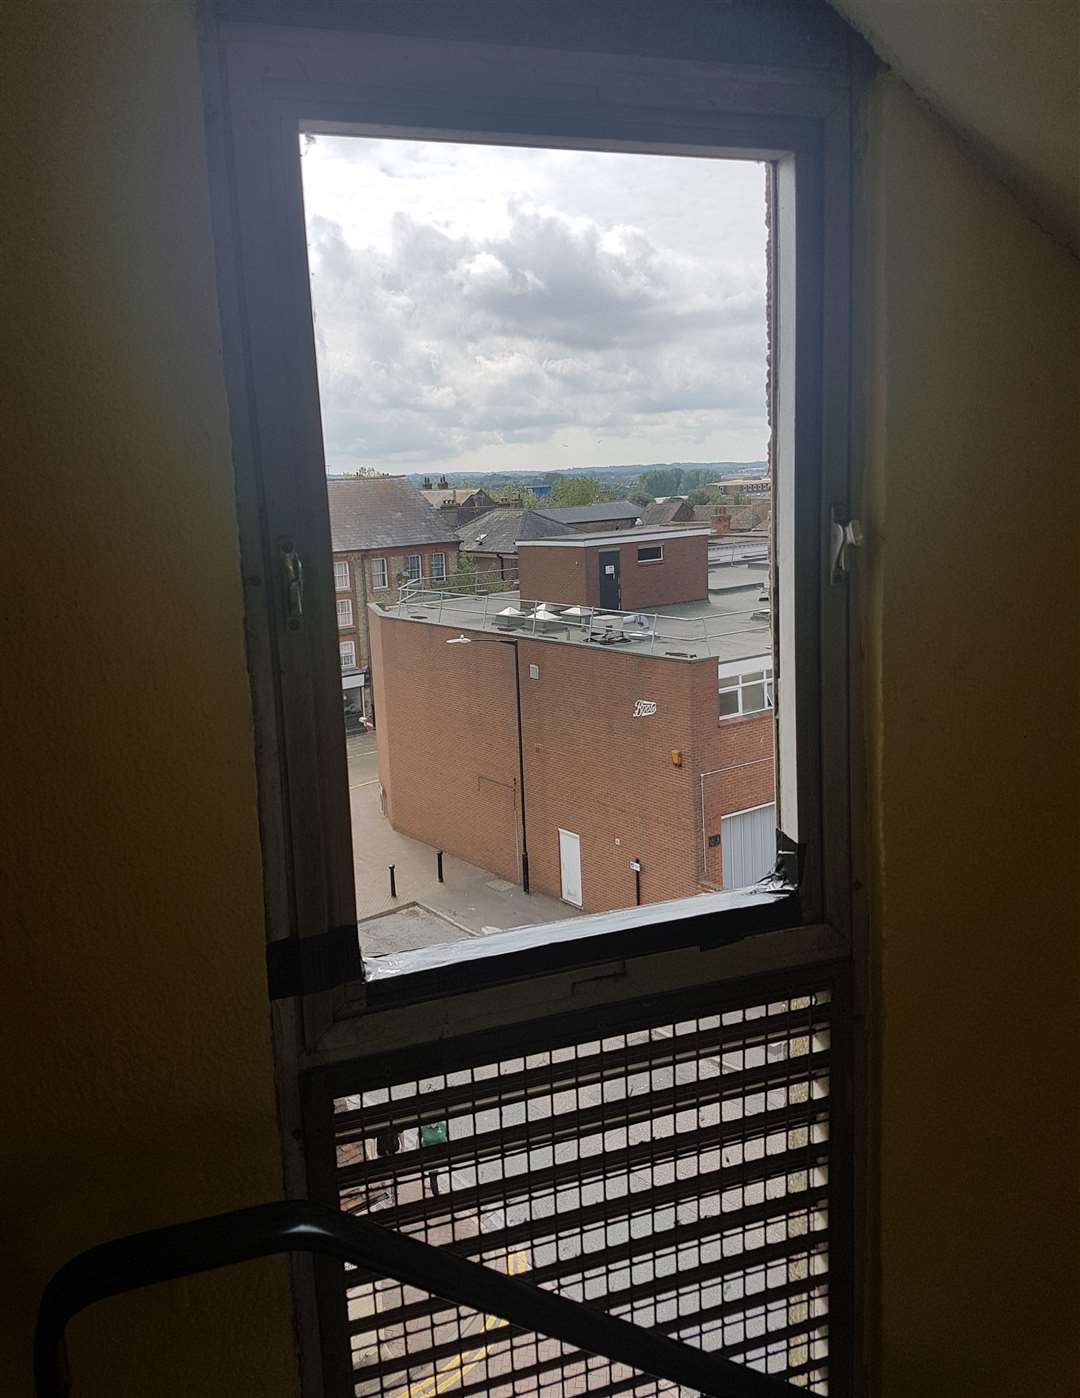 One of the windows in the stairwell was smashed in 2019